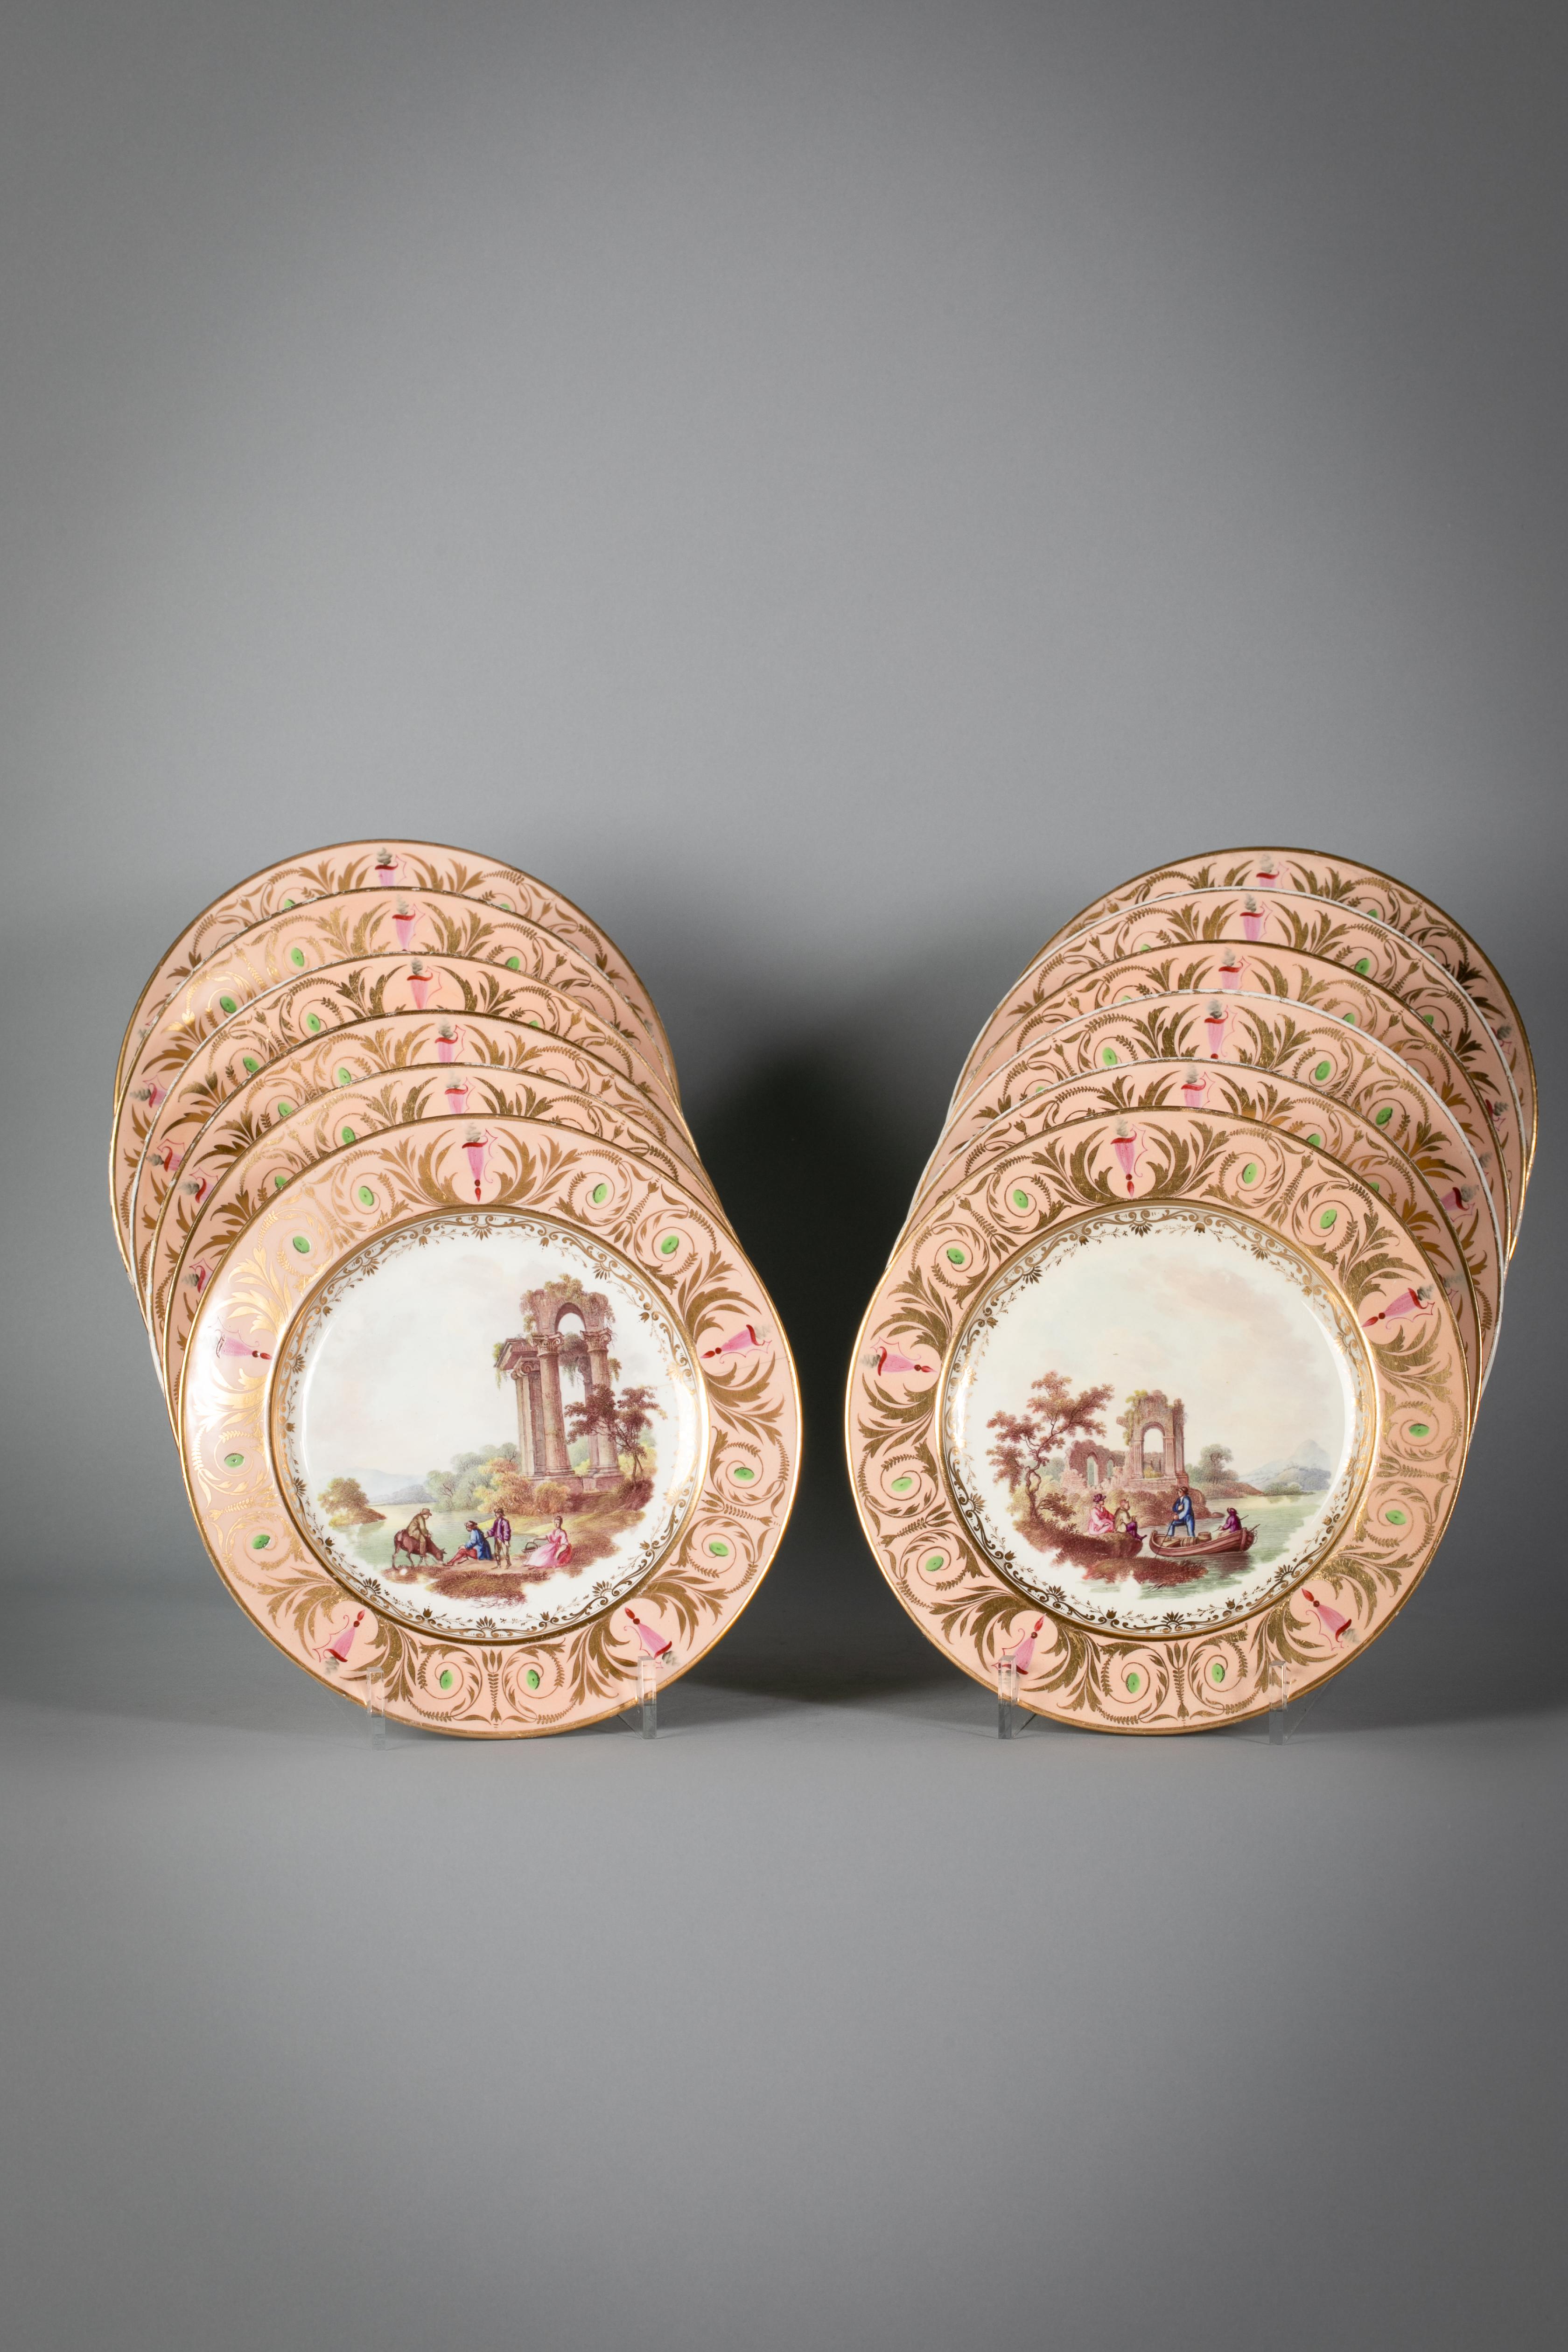 Each with figural and animal painting within landscapes, each identified location on the verso consisting of 25 pieces: Compote, pair of covered sauce tureens and stands, 2 scalloped dishes, 2 shell dishes, 4 lozenge dishes, 14 plates.